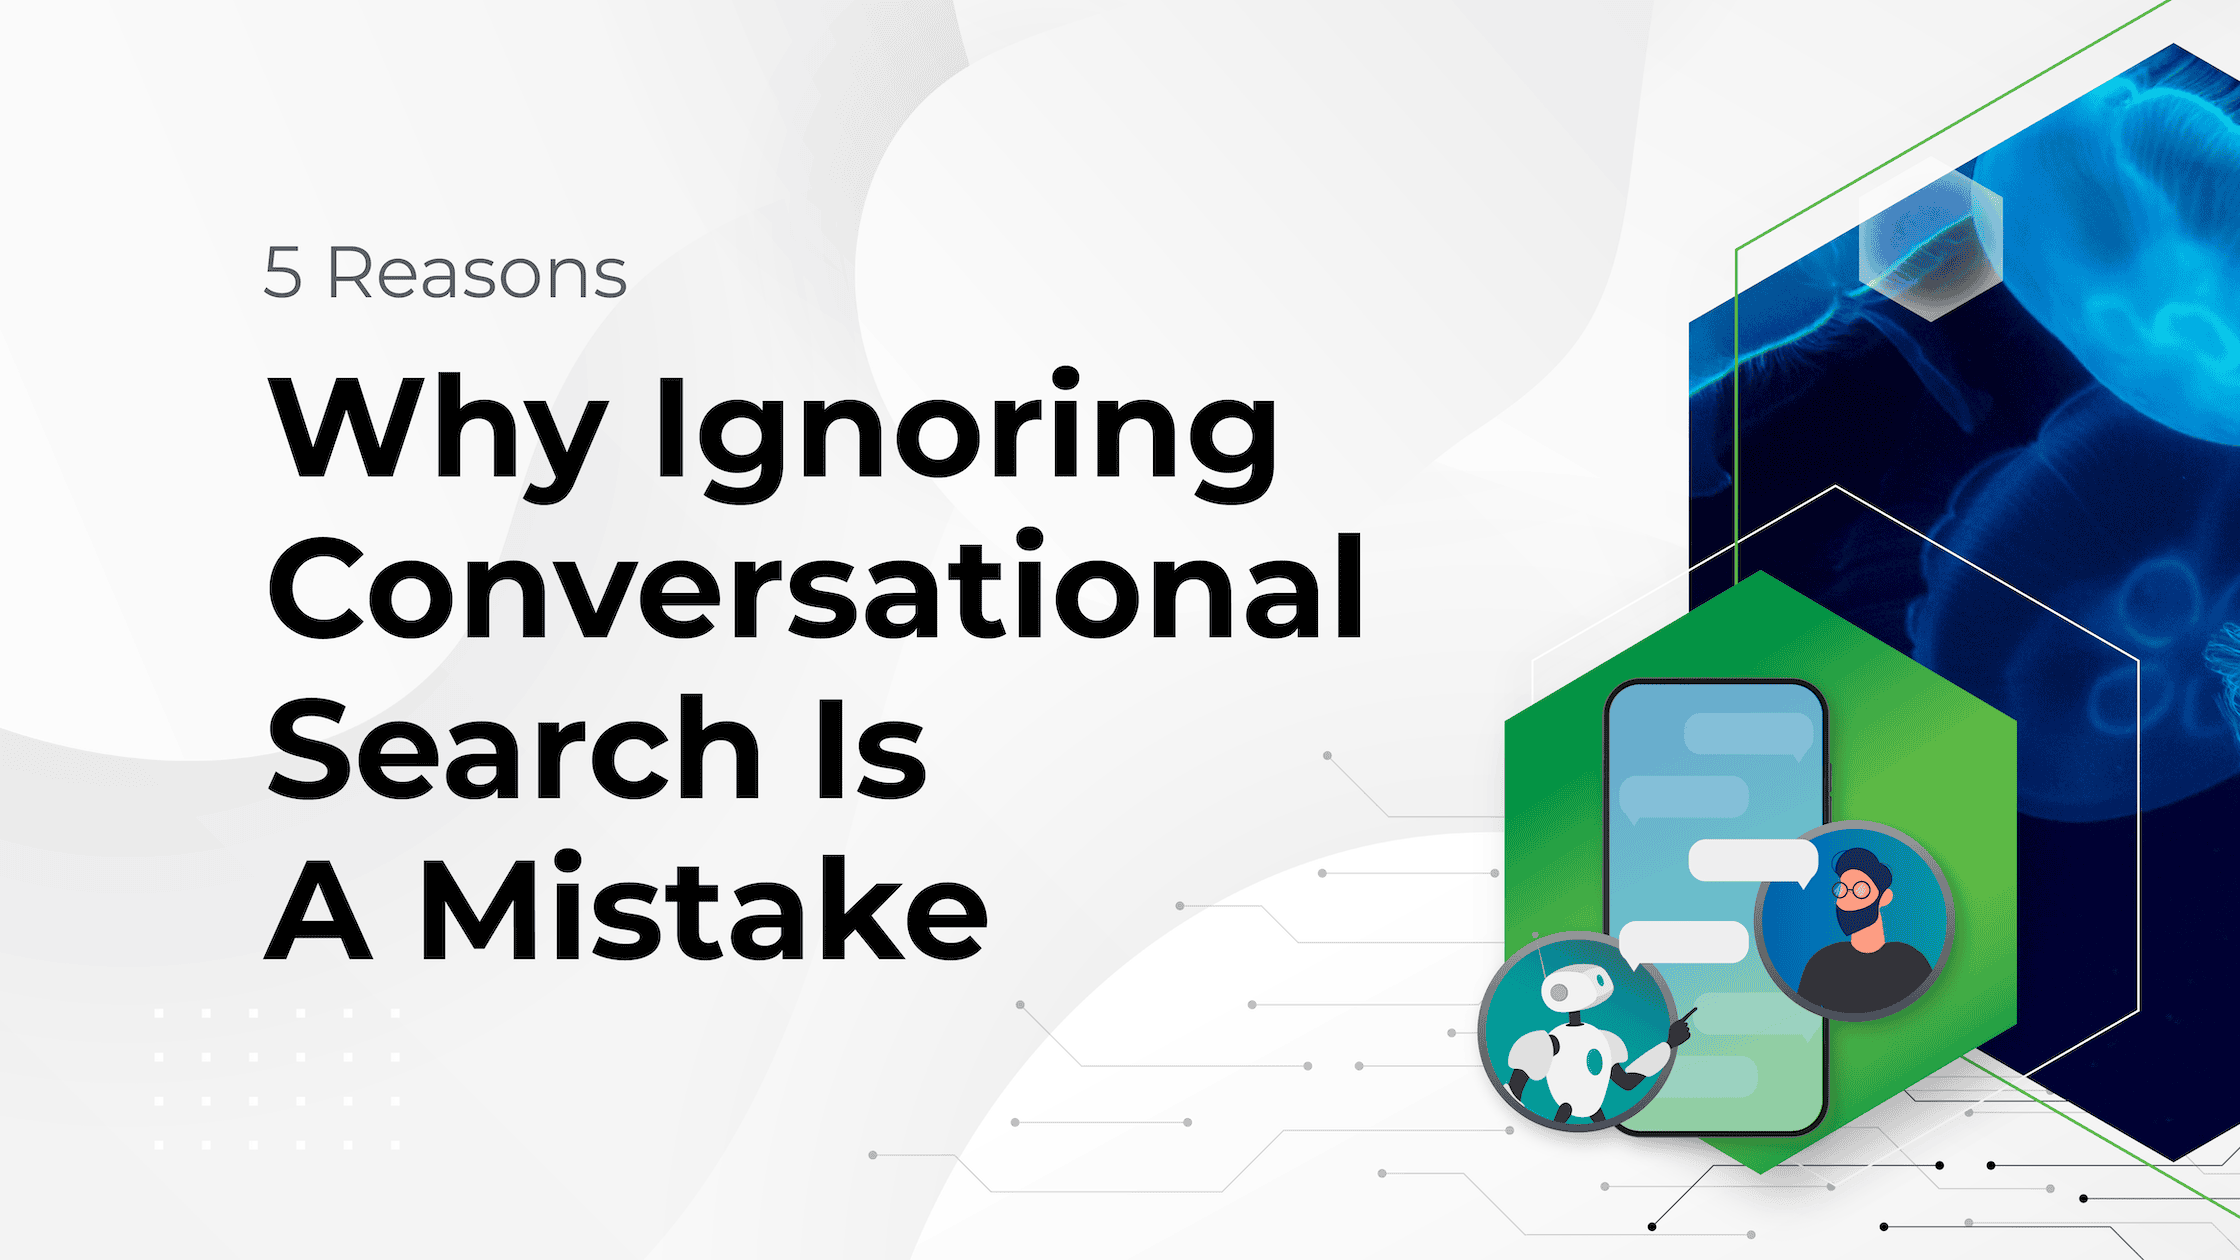 5 Reasons Why Ignoring Conversational Search Is A Mistake